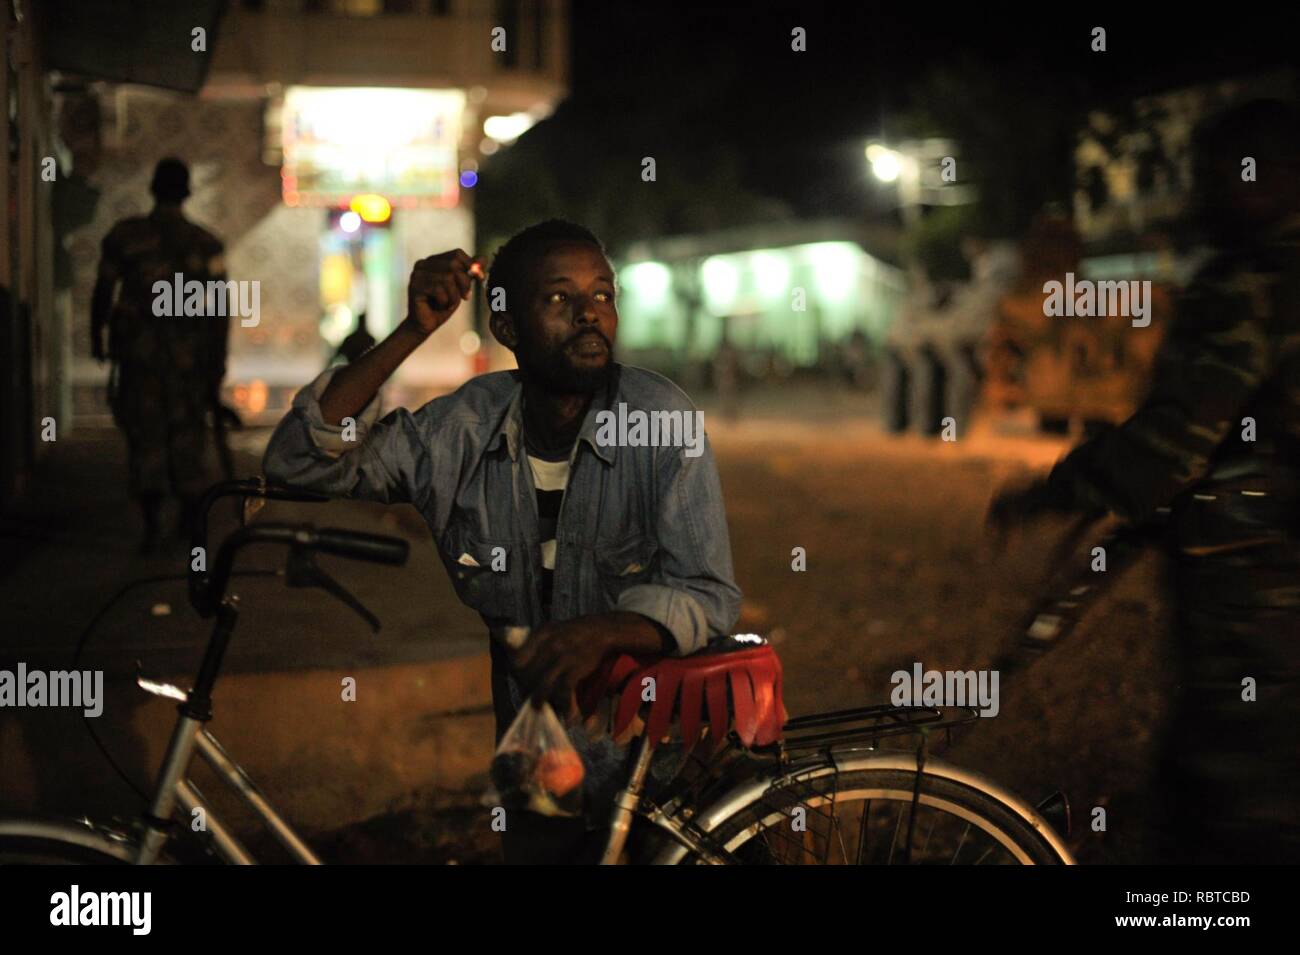 A Somali man smokes a cigarette while Ethiopian soldiers, as part of the African Union Mission in Somalia, conduct a night patrol through the city of Baidoa, Somalia, on June 22. AMISOM Photo - Tobin (14332224890). Stock Photo